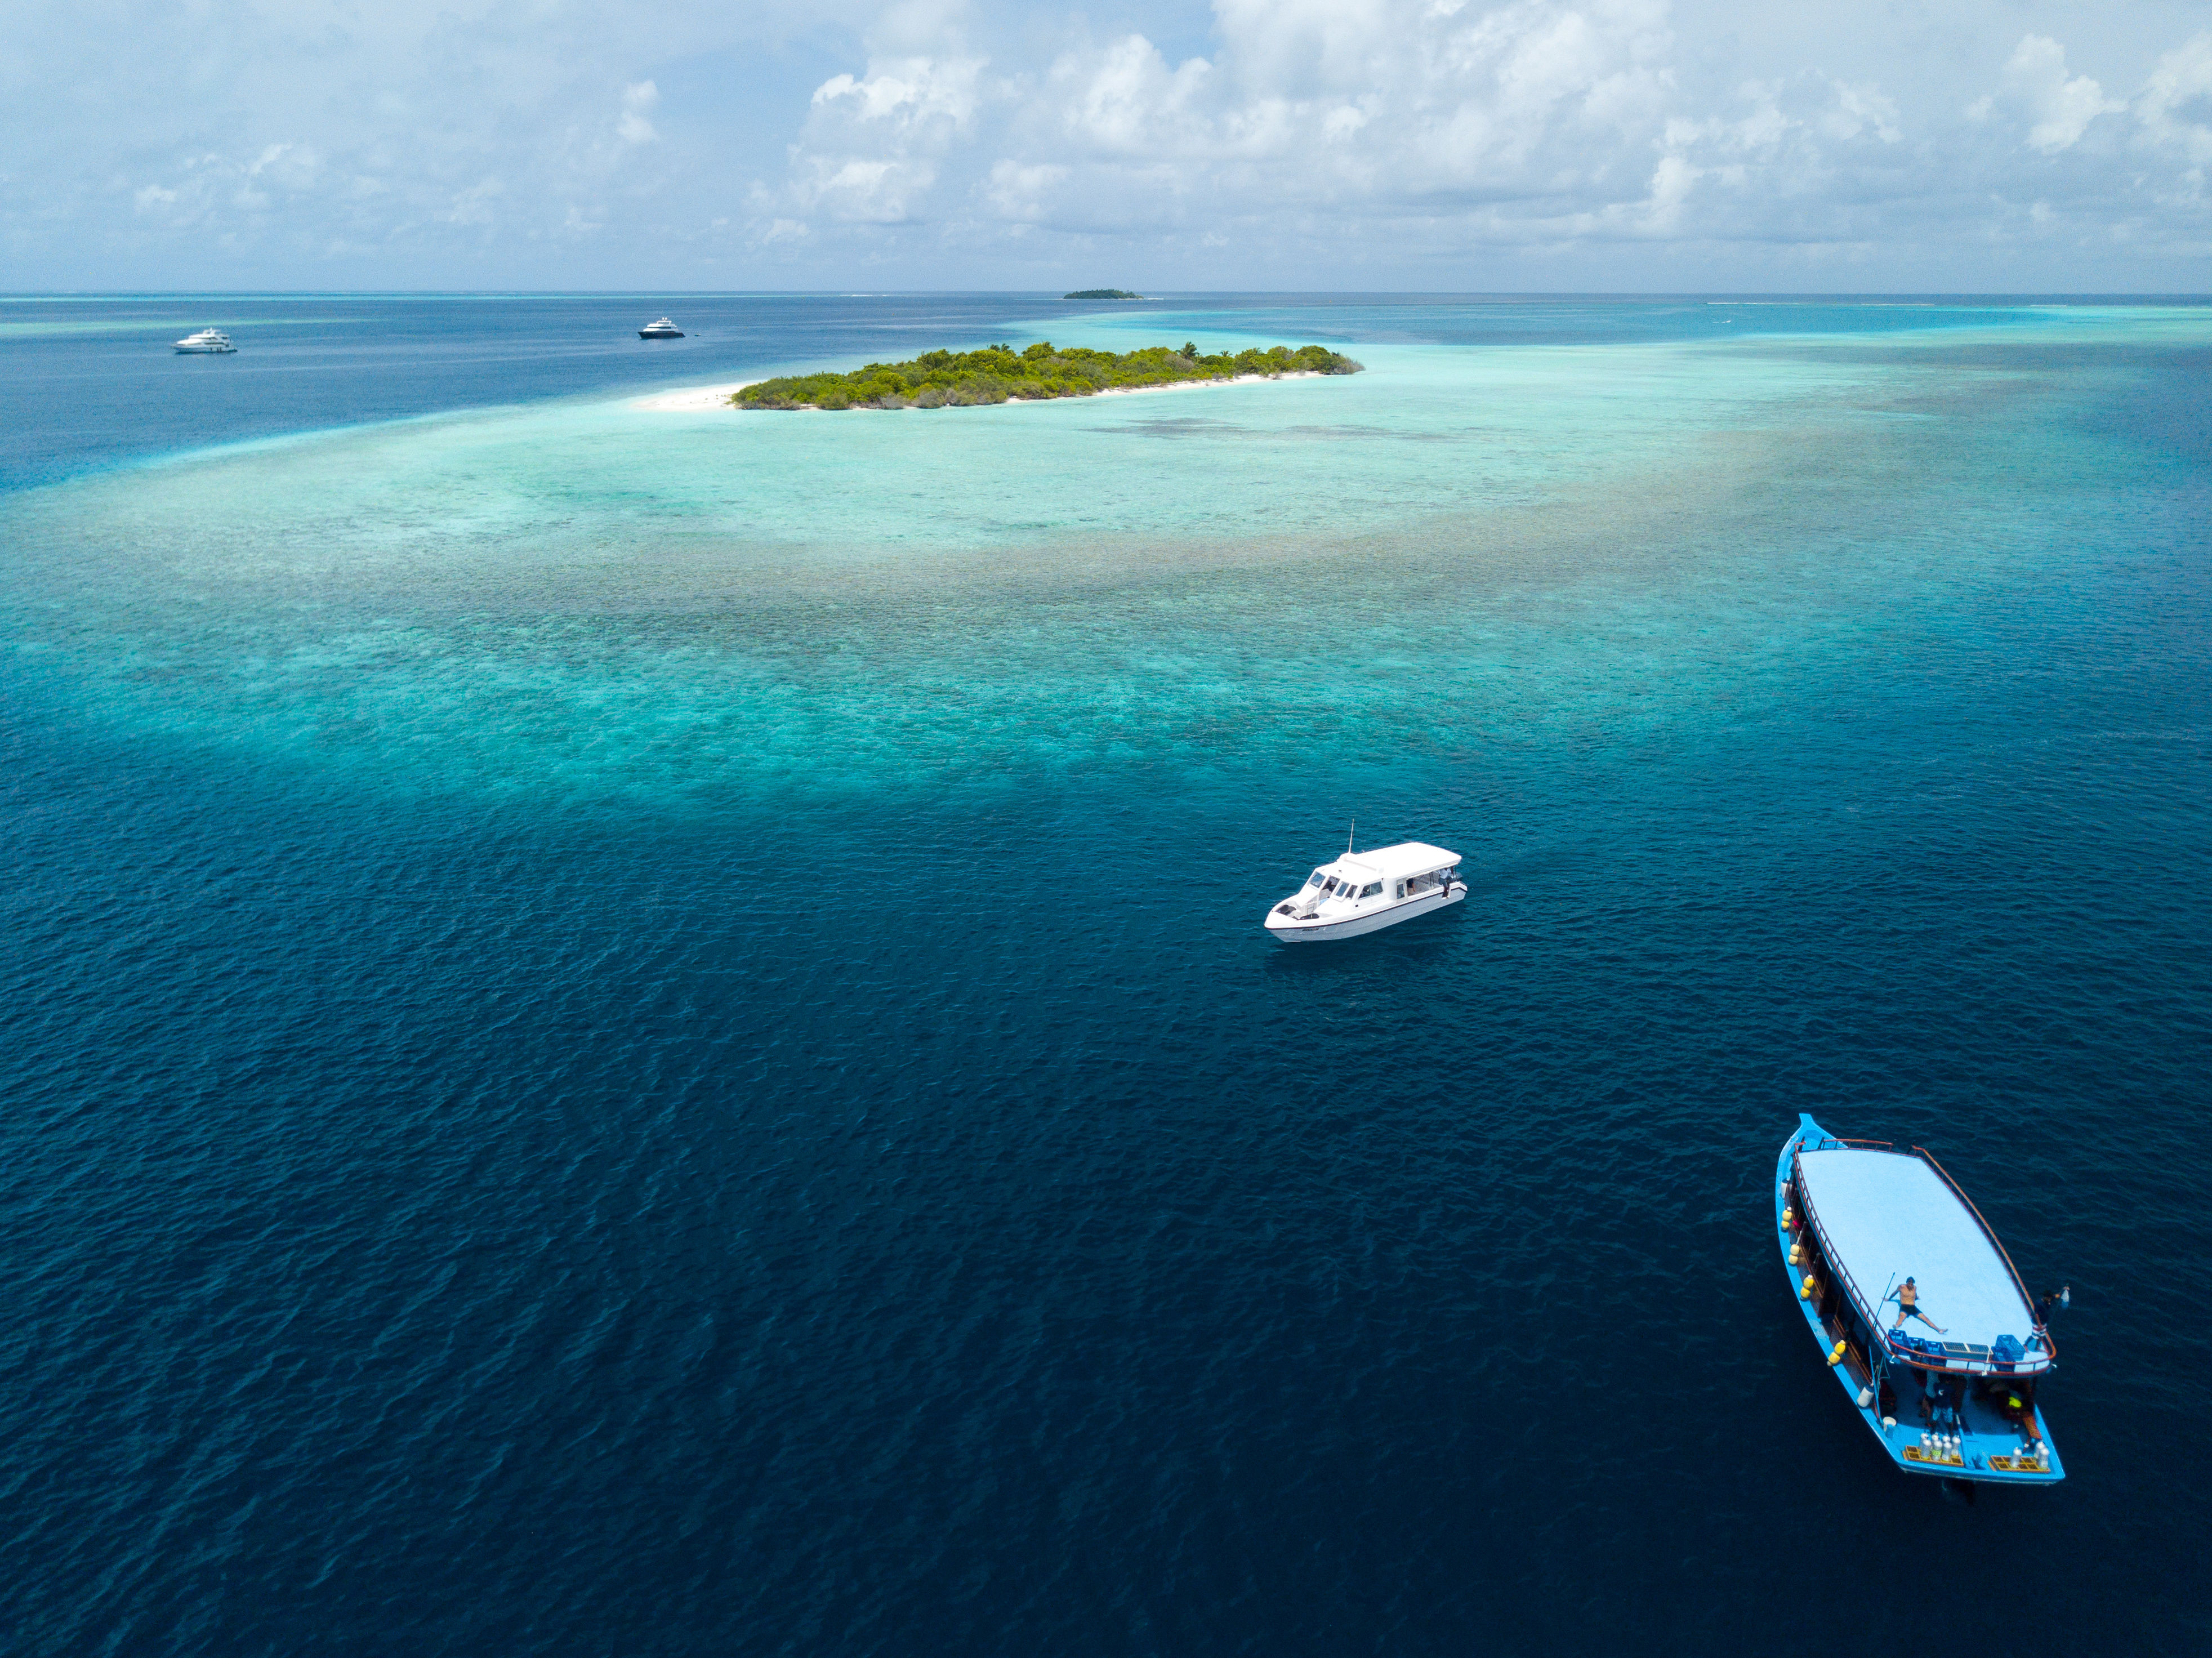 Aerial view of scuba diving boats near tropical islands in Baa Atoll Maldives.